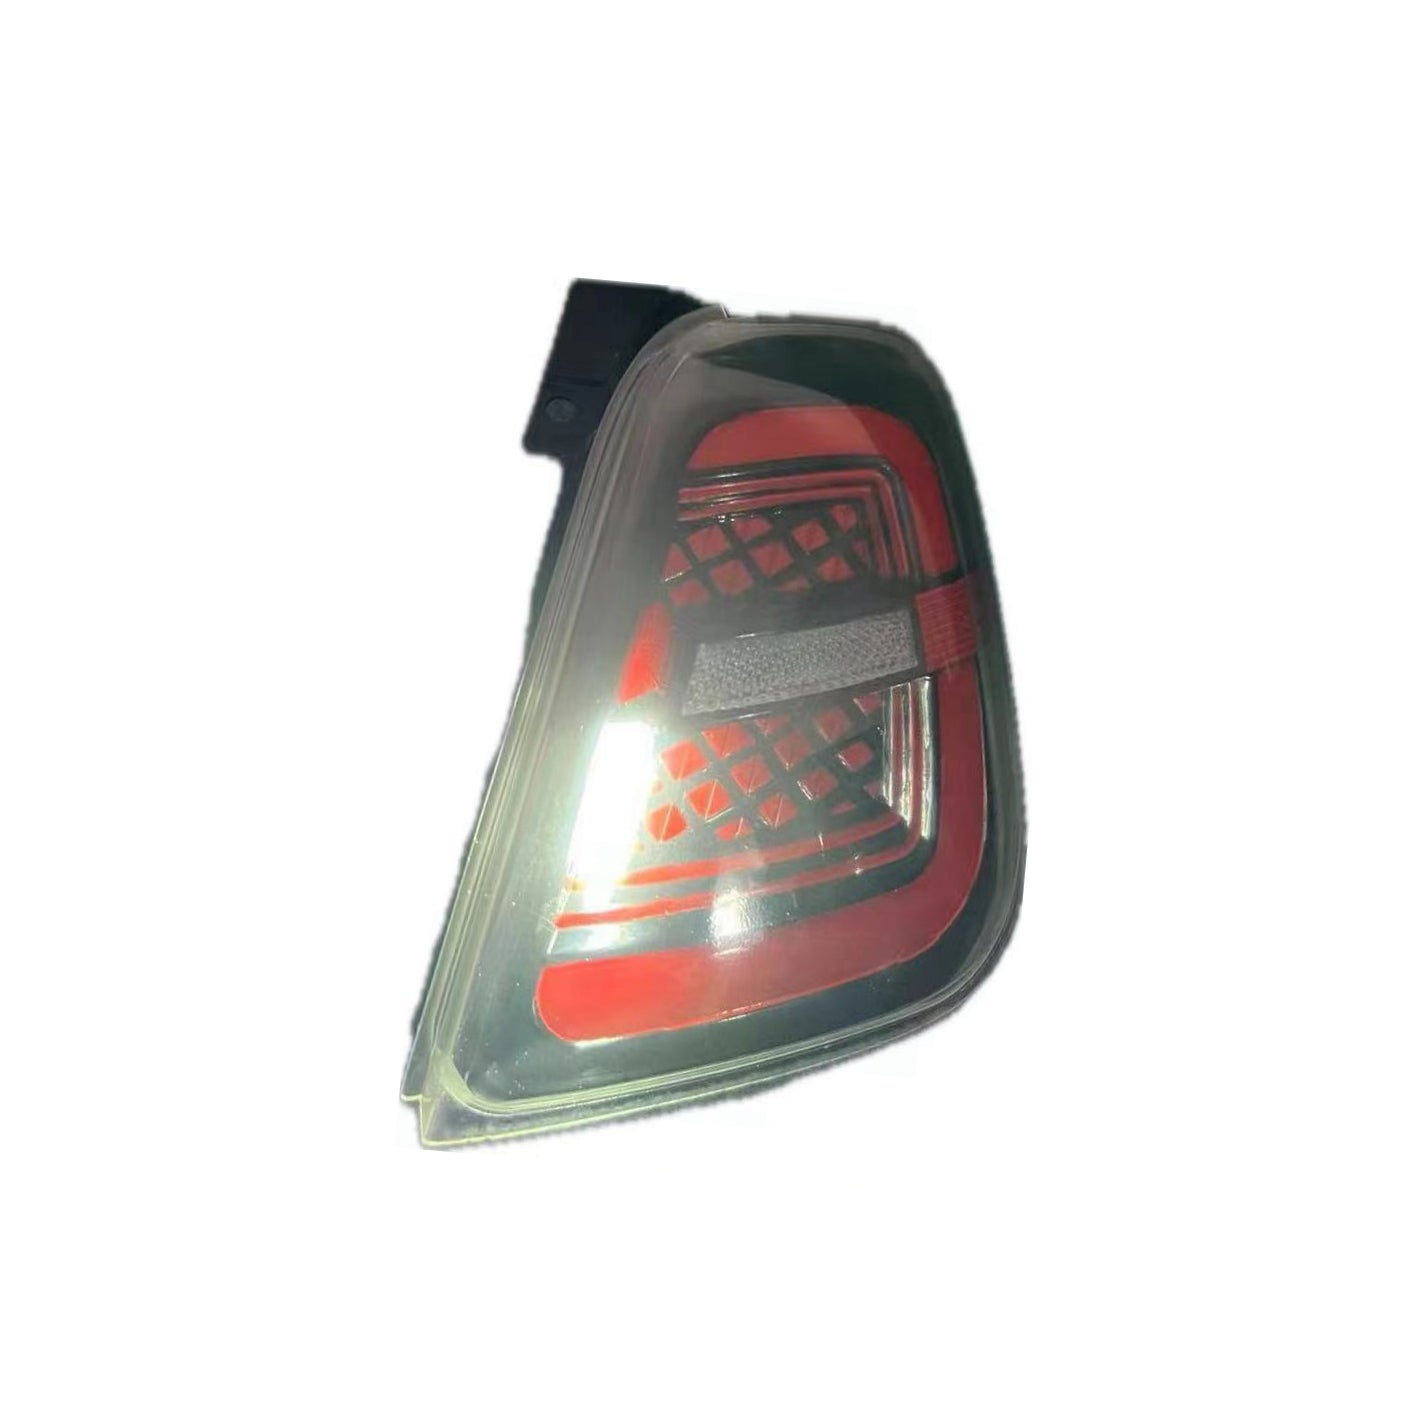 1 set of LED tail light for 2007-2021 Fiat 500 and Abarth